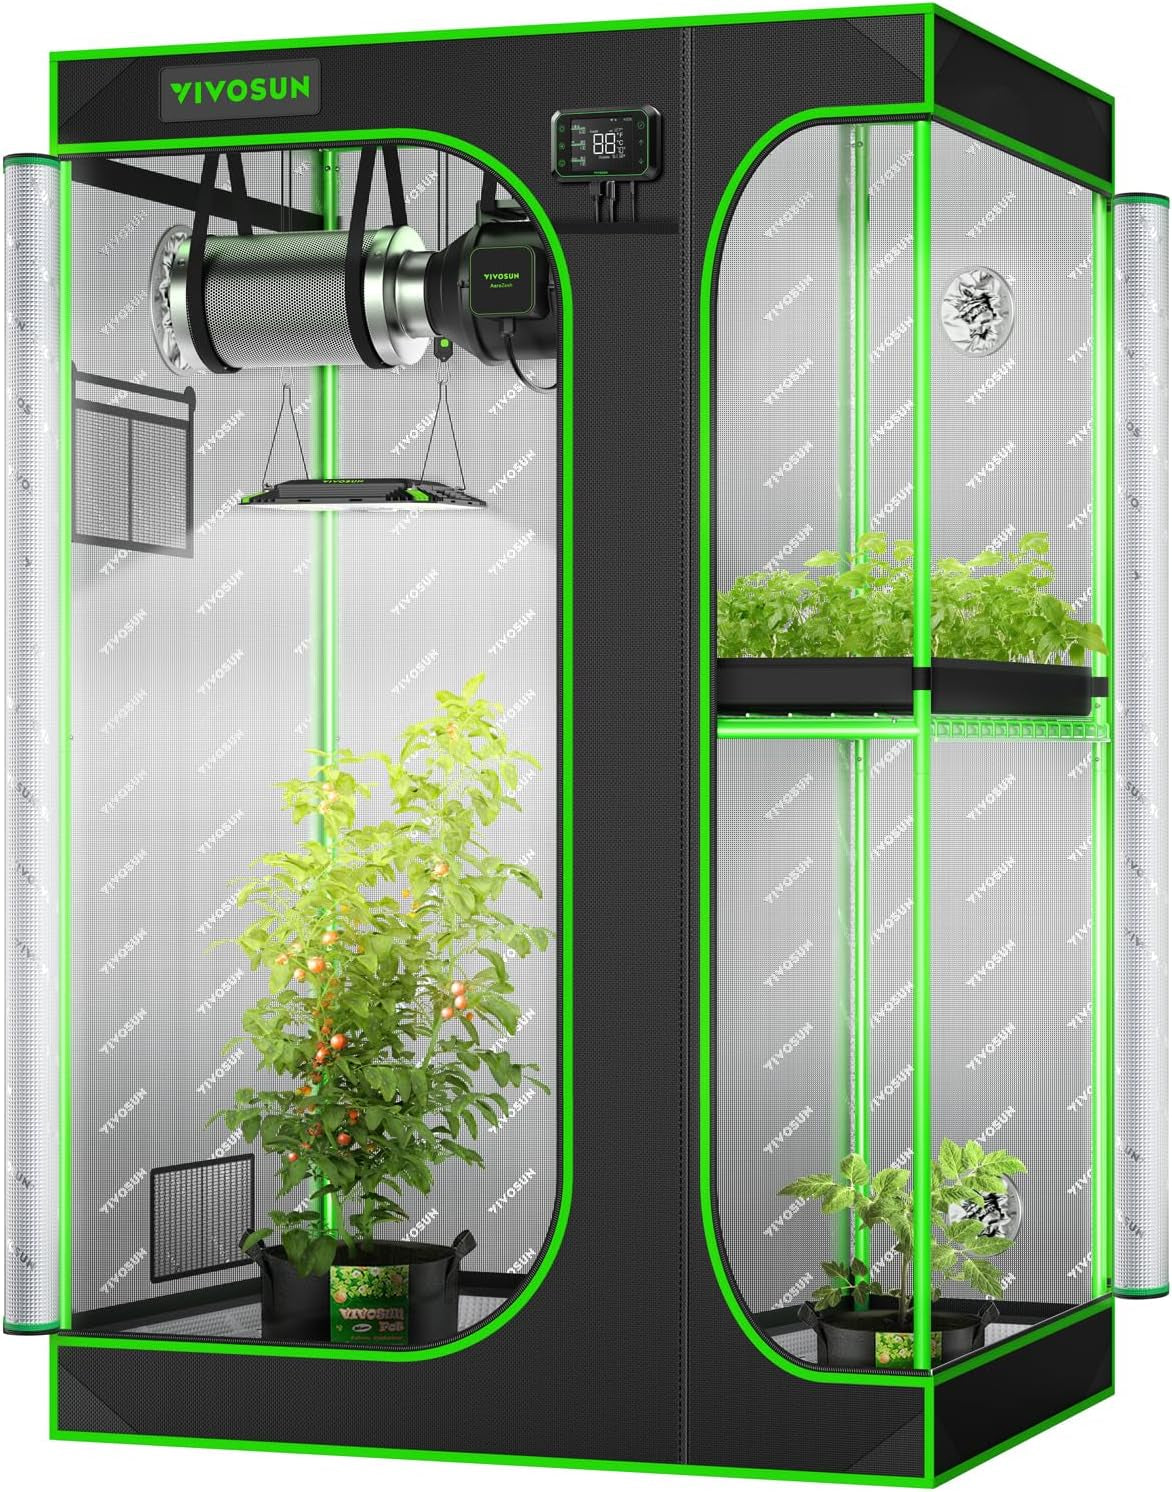 D325 2-In-1 3X2 Grow Tent, 36"X24"X53" High Reflective Mylar with Multi-Chamber and Floor Tray for Hydroponic Indoor Plant